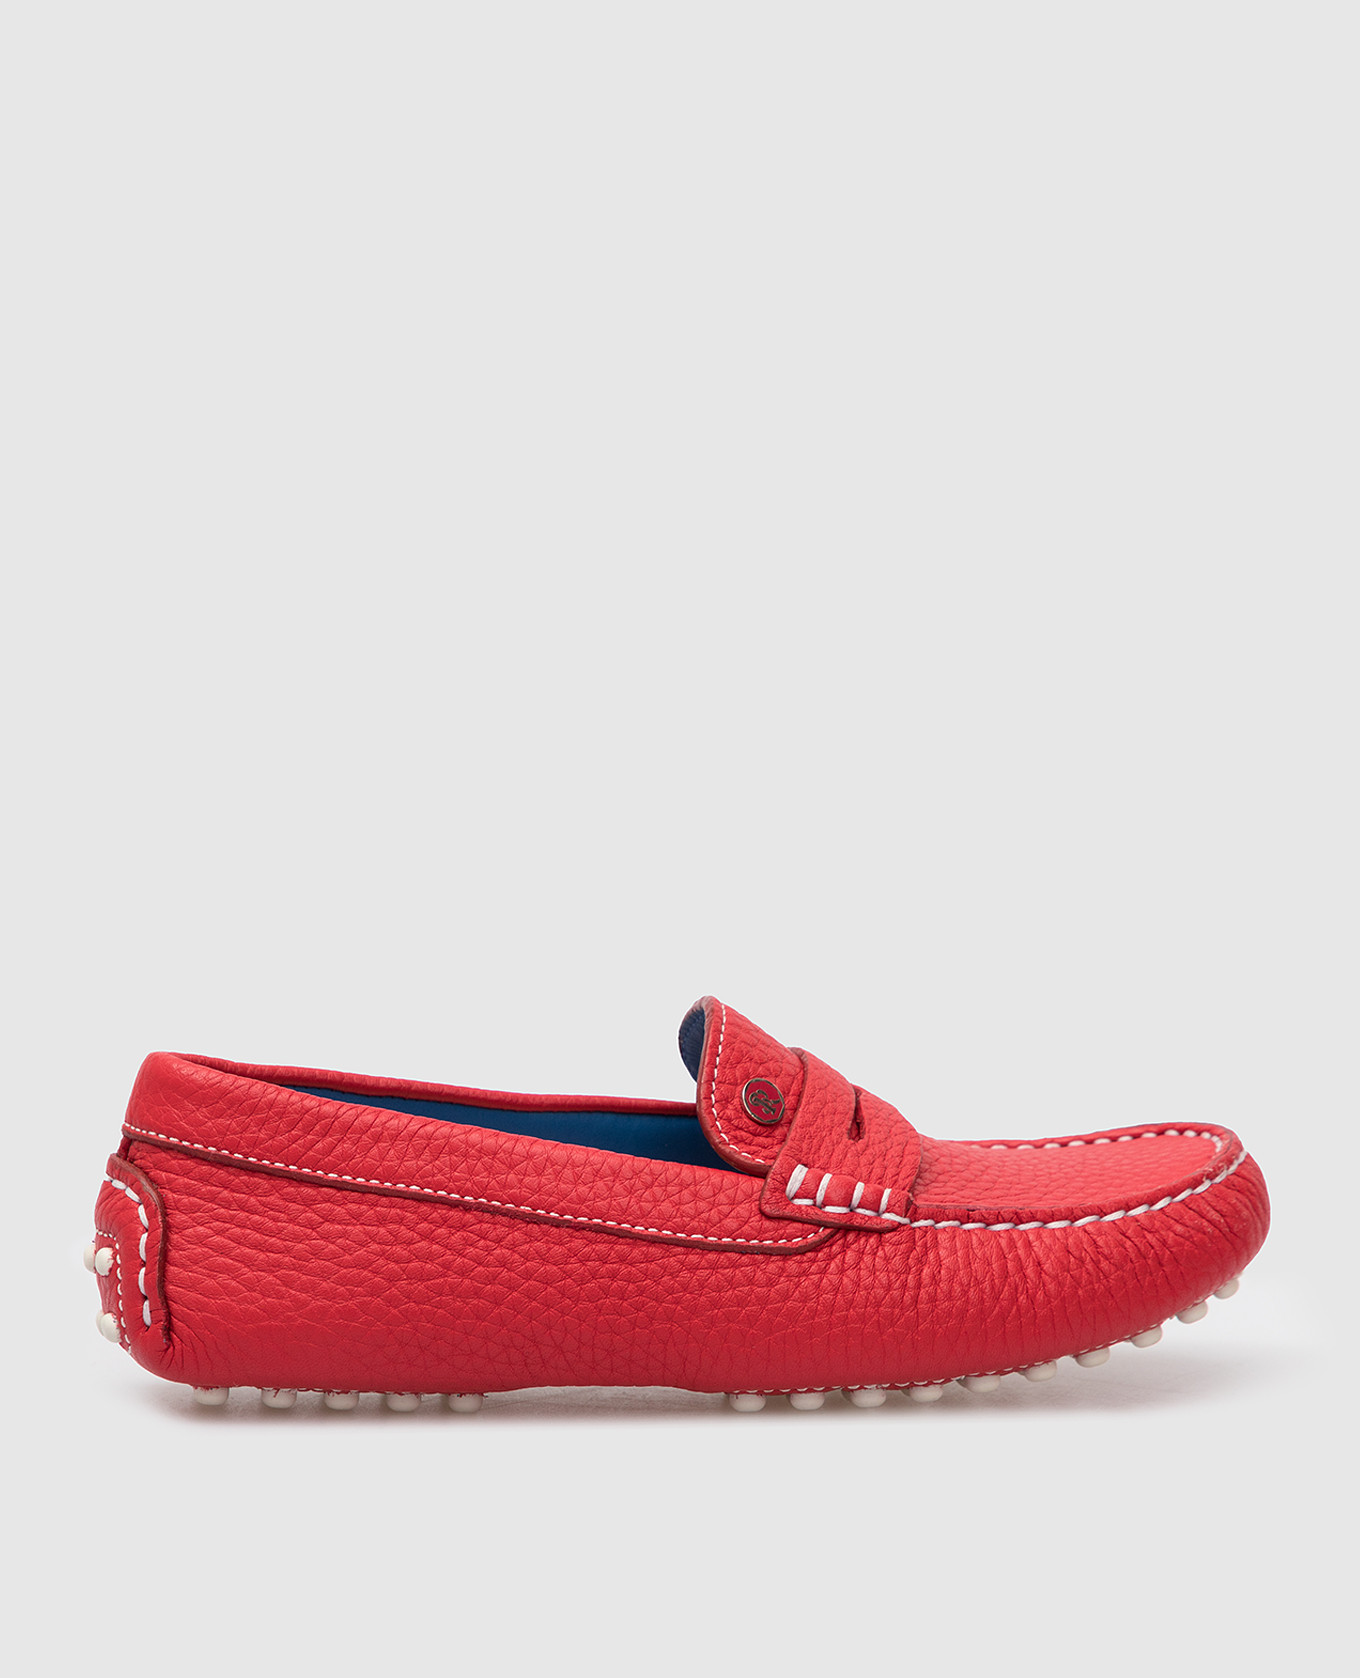 Children's red leather moccasins